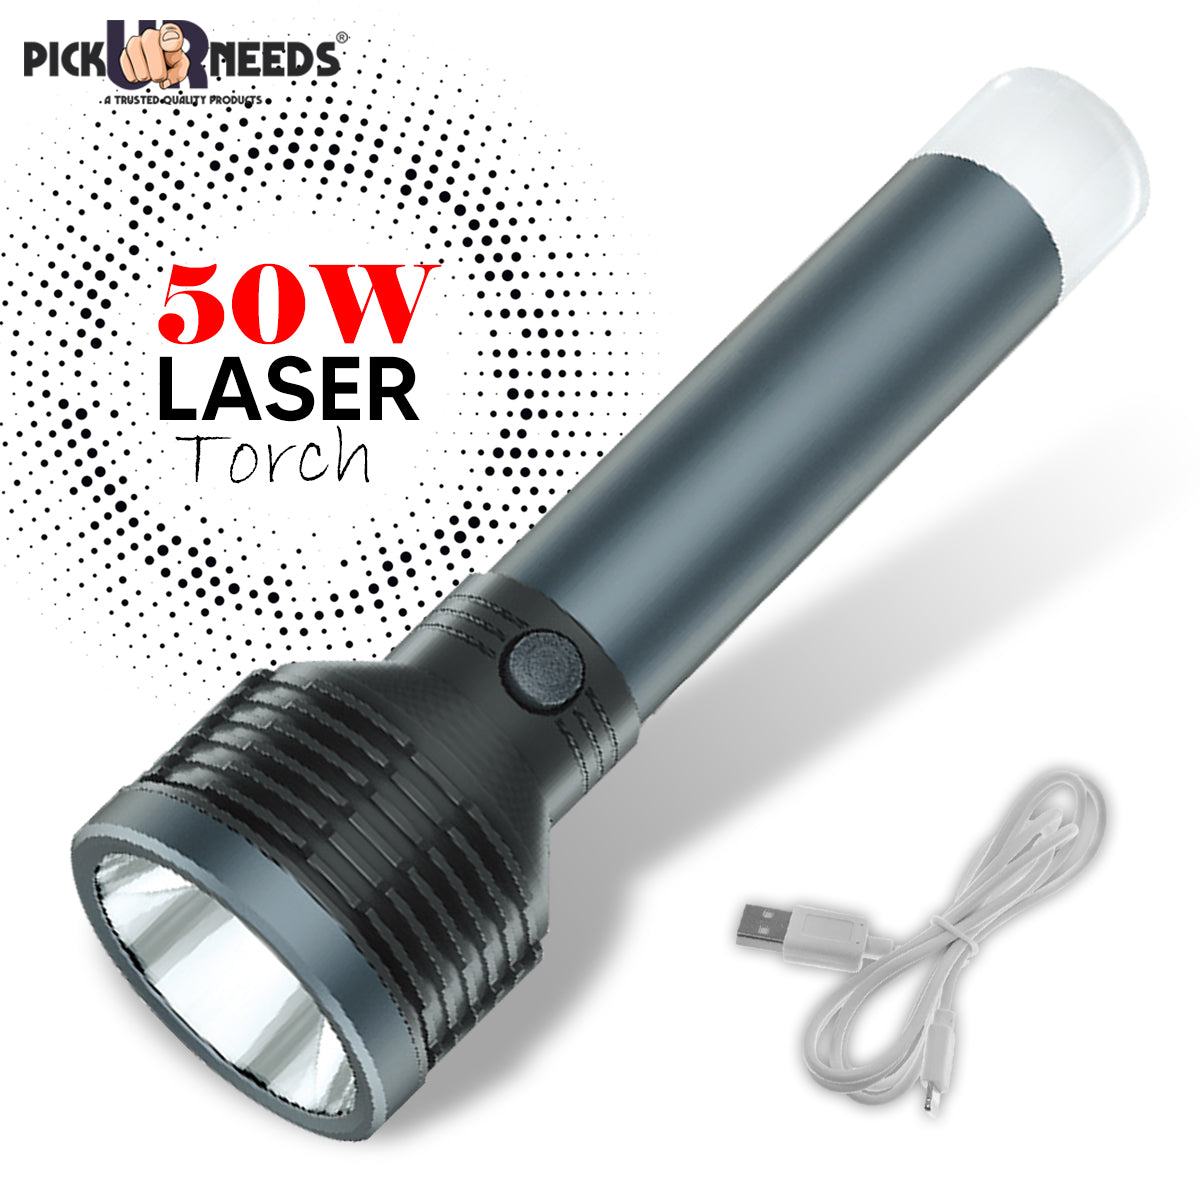 Pick Ur Needs Rechargeable Long Range Small Search Torch Light With Aluminium Body